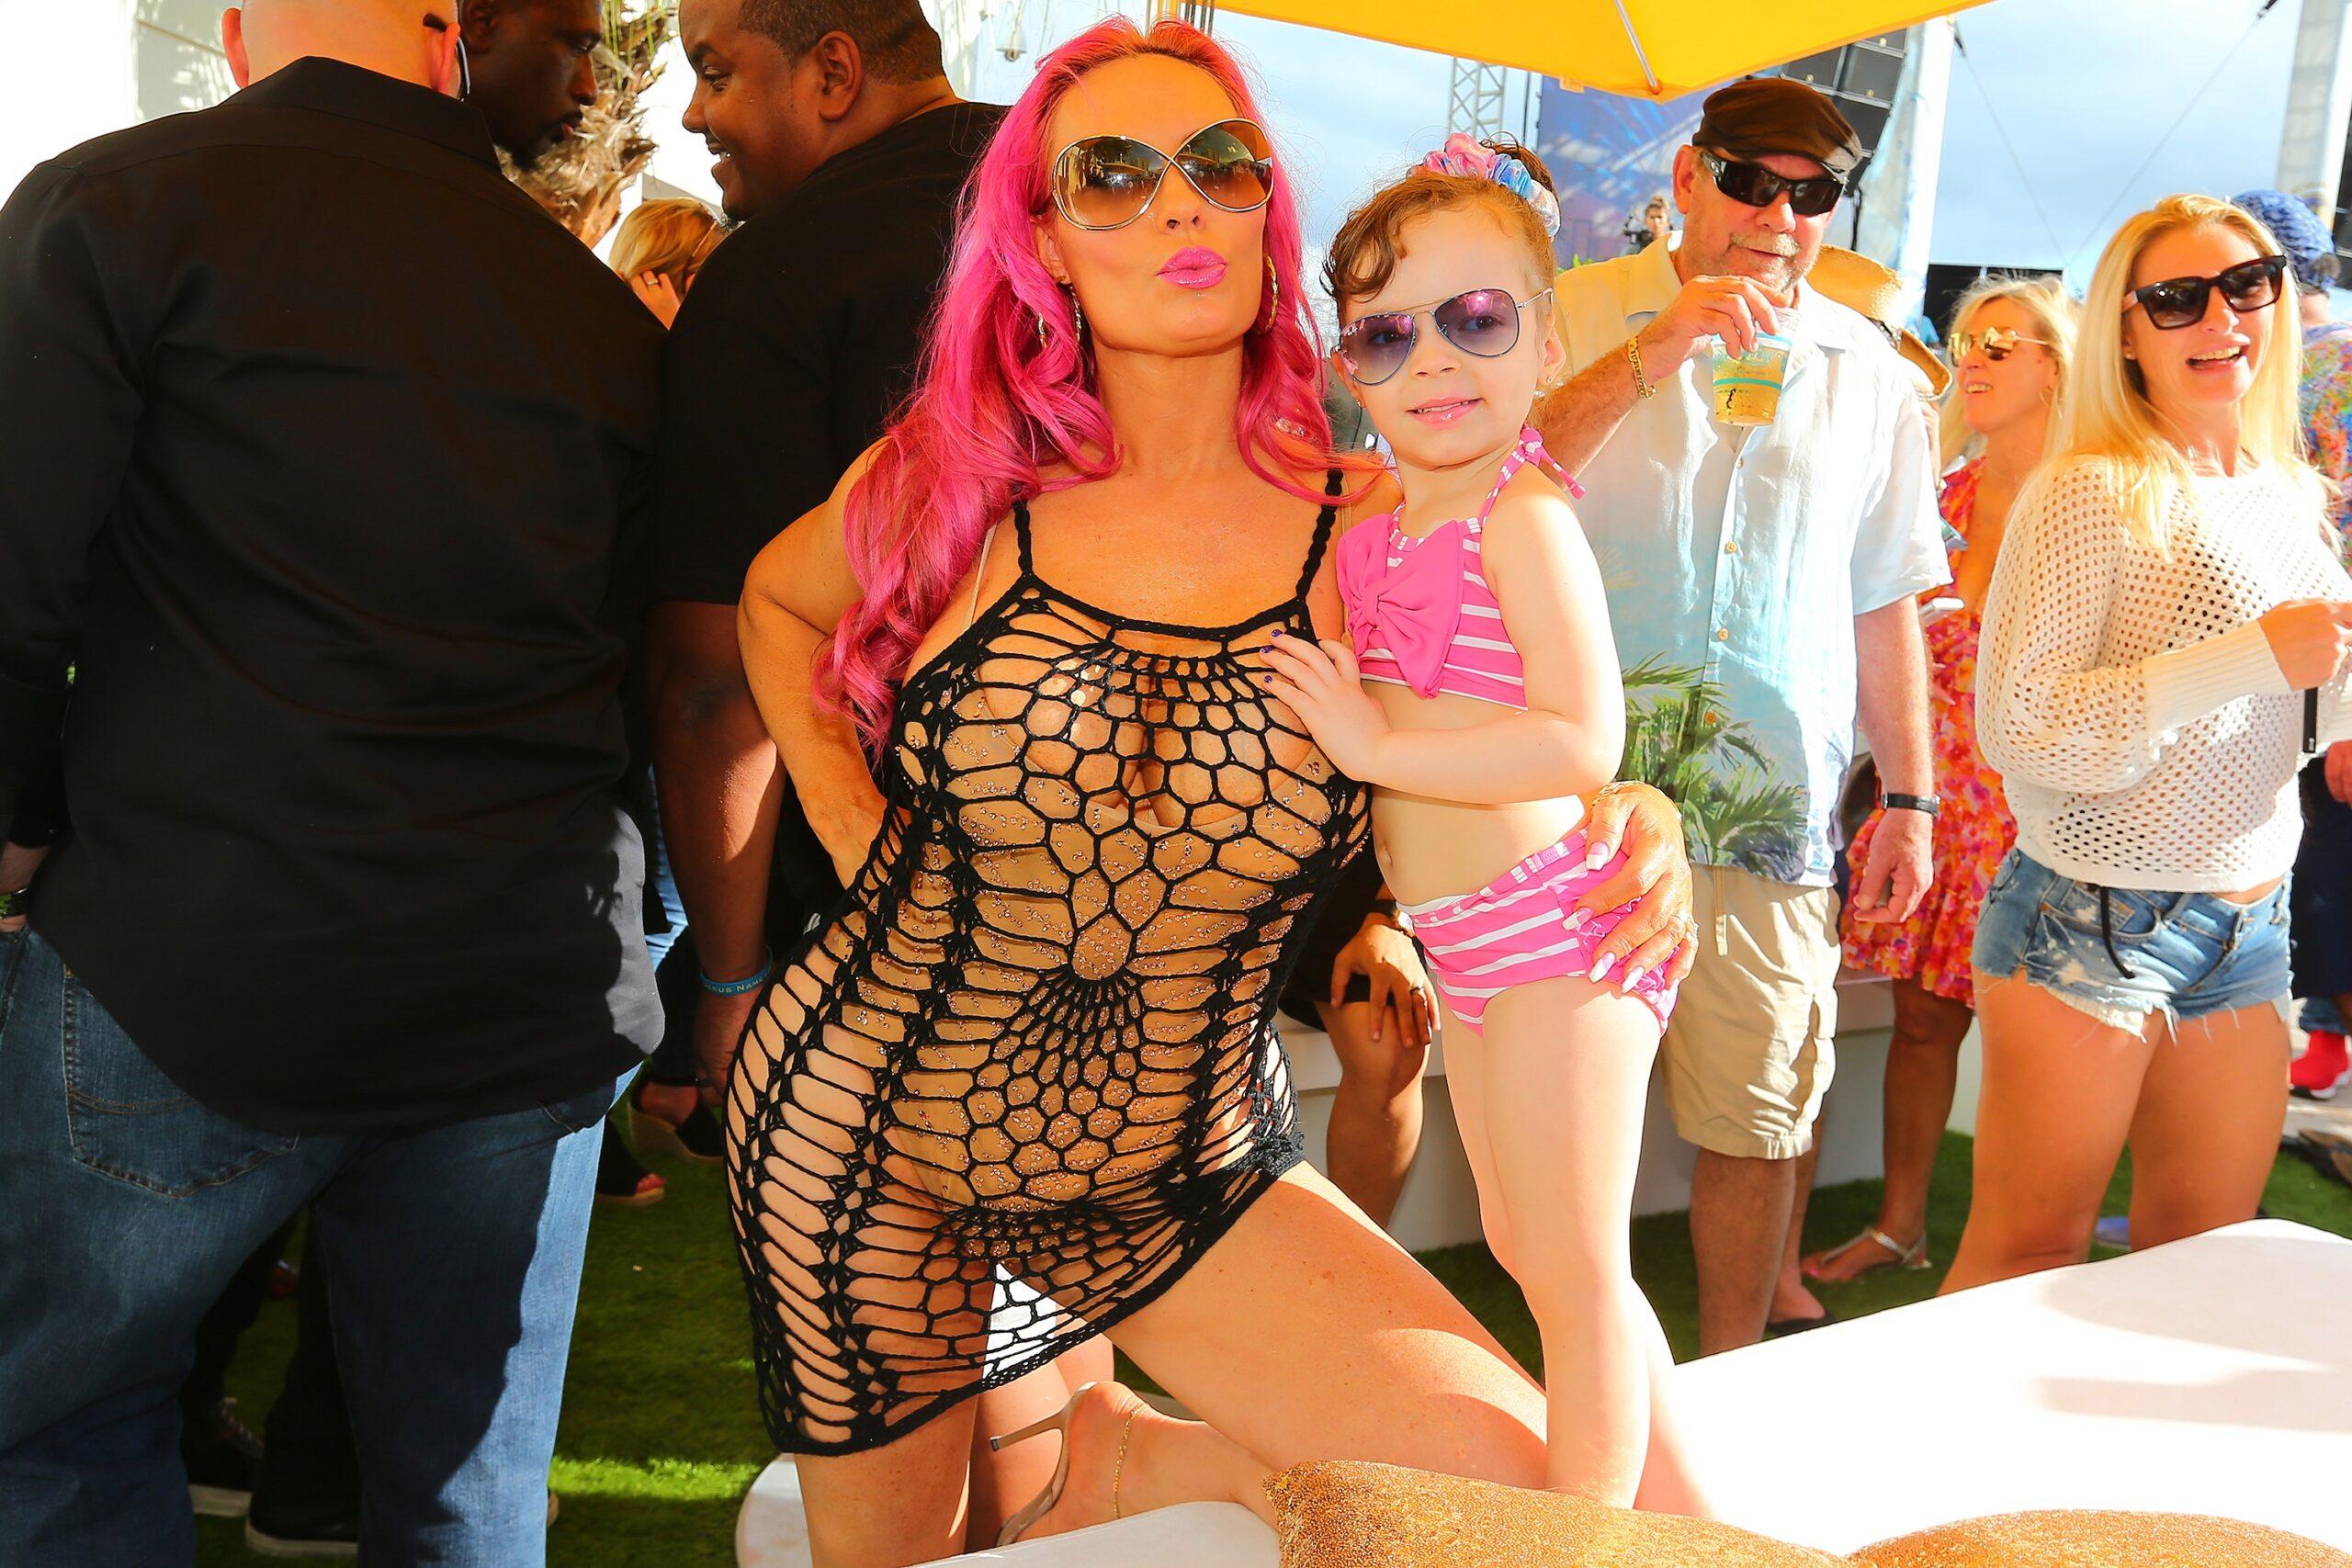 Ice-T along with his wife Coco and daughter Chanel Nicole, arrive in swimwear at the Tampa Bay Daylife party